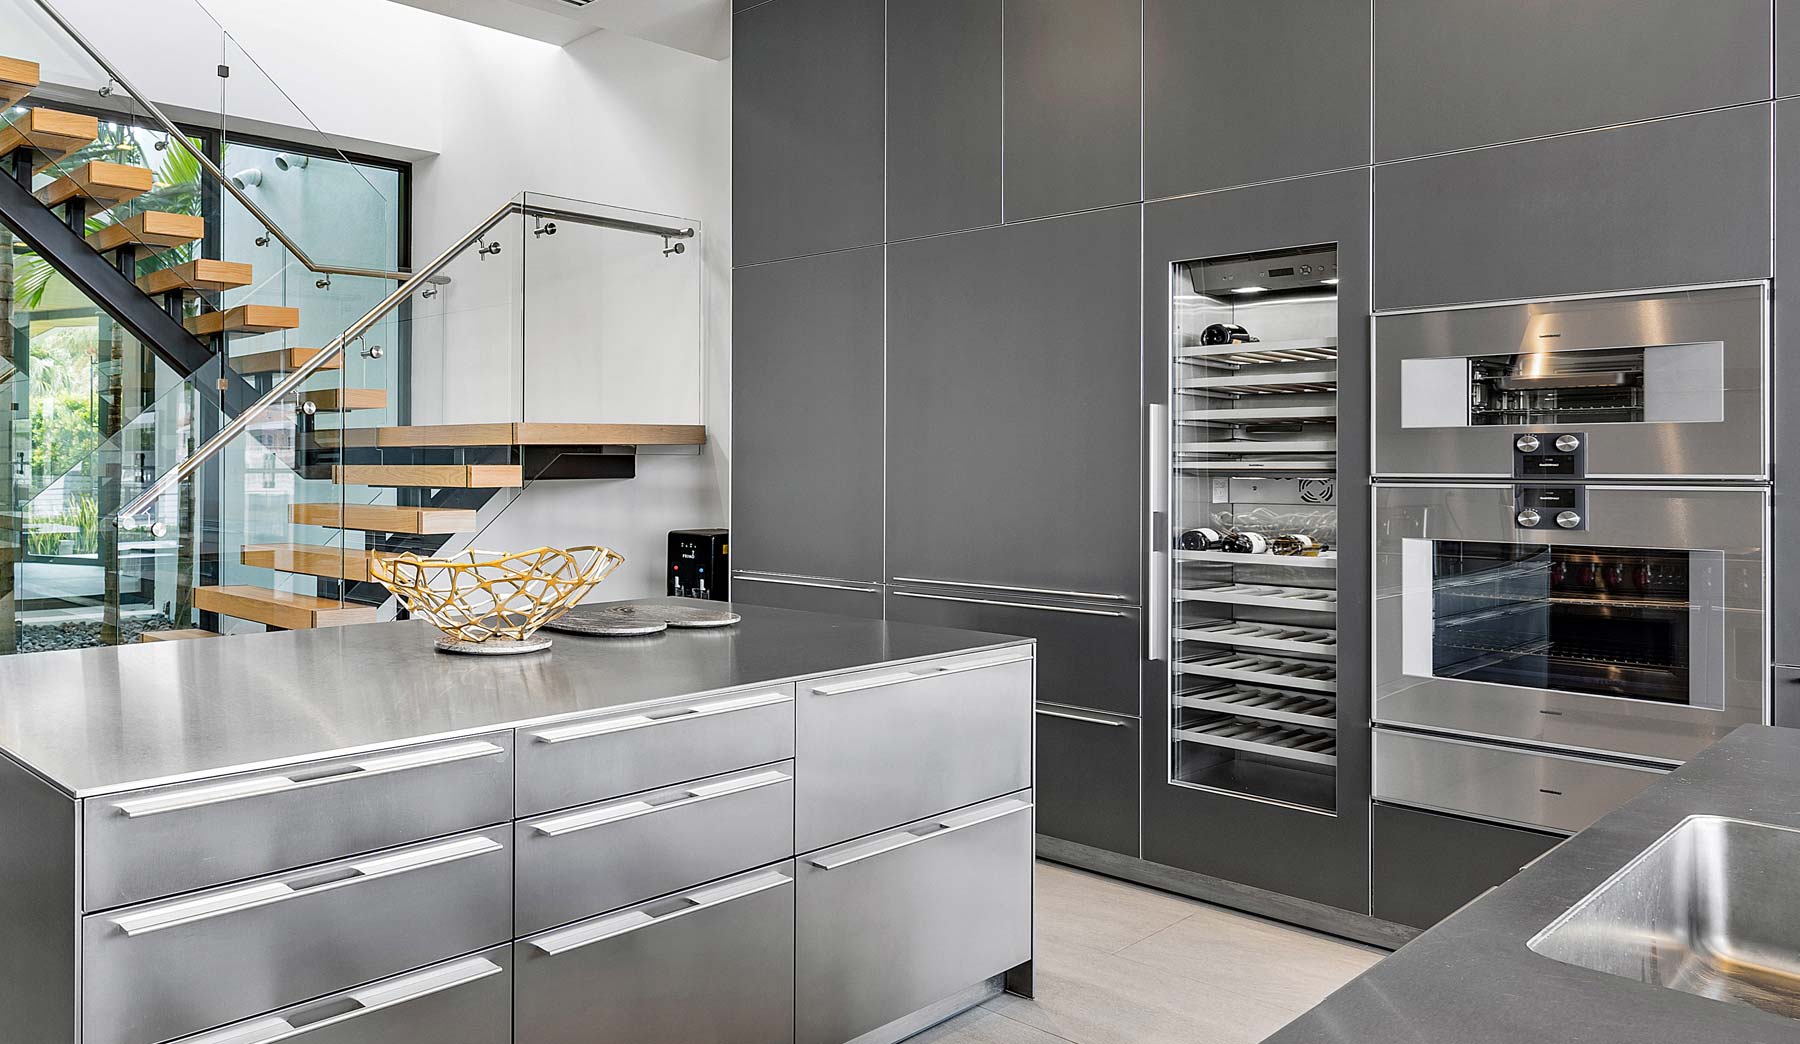 https://www.theupstudio.com/img/infinityhouse/modern-home-design-costs-for-expansive-kitchen-appliance-packages.jpg